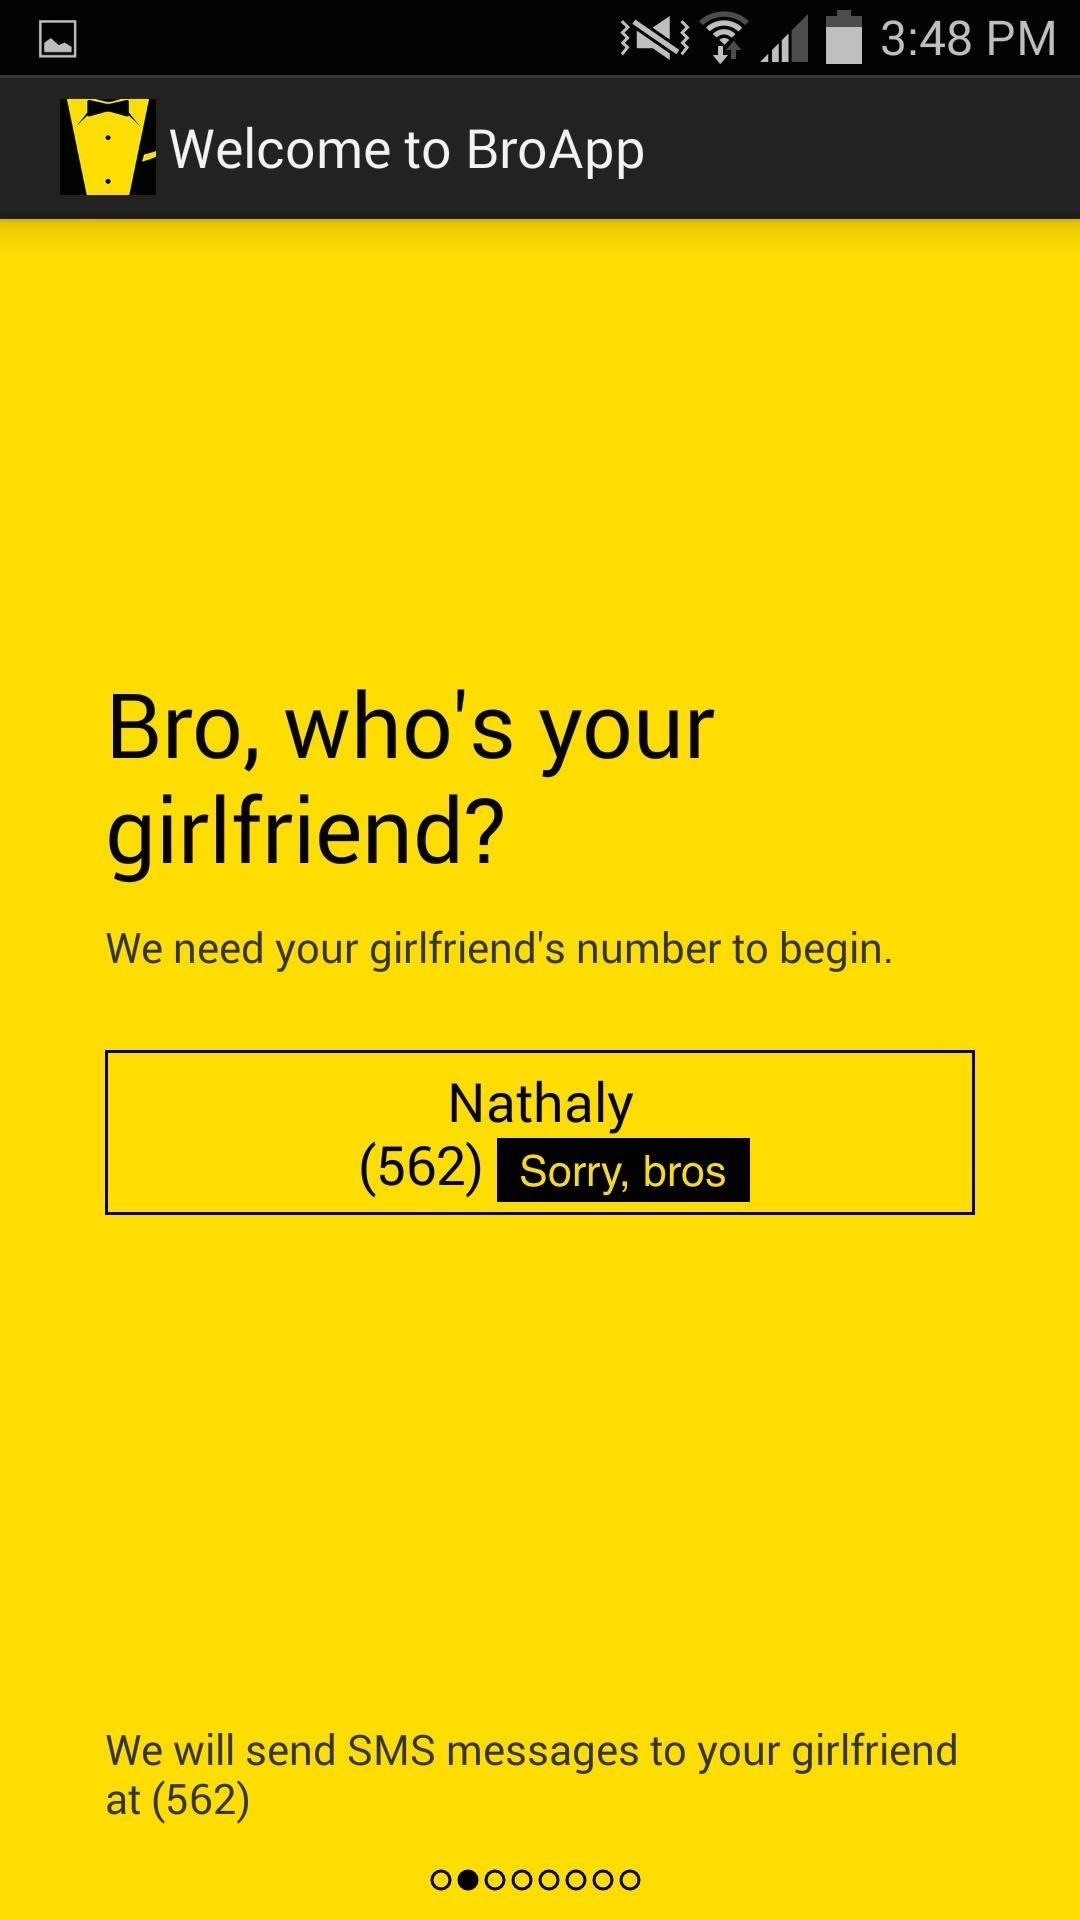 Get More Bro Time by Automating Loving Texts to Your Girlfriend